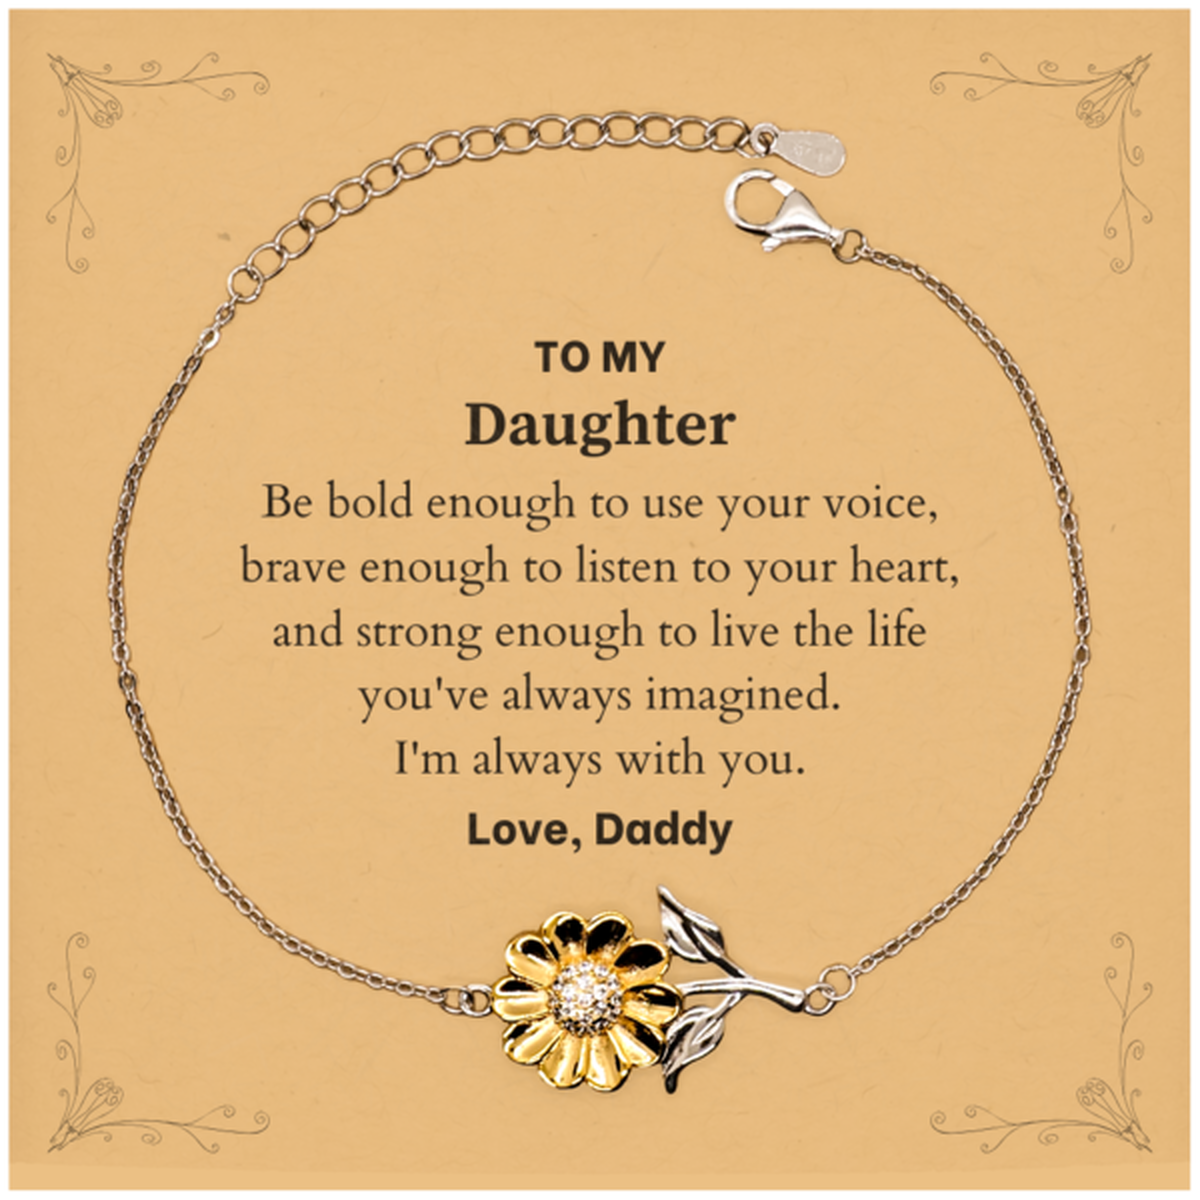 Keepsake Daughter Sunflower Bracelet Gift Idea Graduation Christmas Birthday Daughter from Daddy, Daughter Be bold enough to use your voice, brave enough to listen to your heart. Love, Daddy